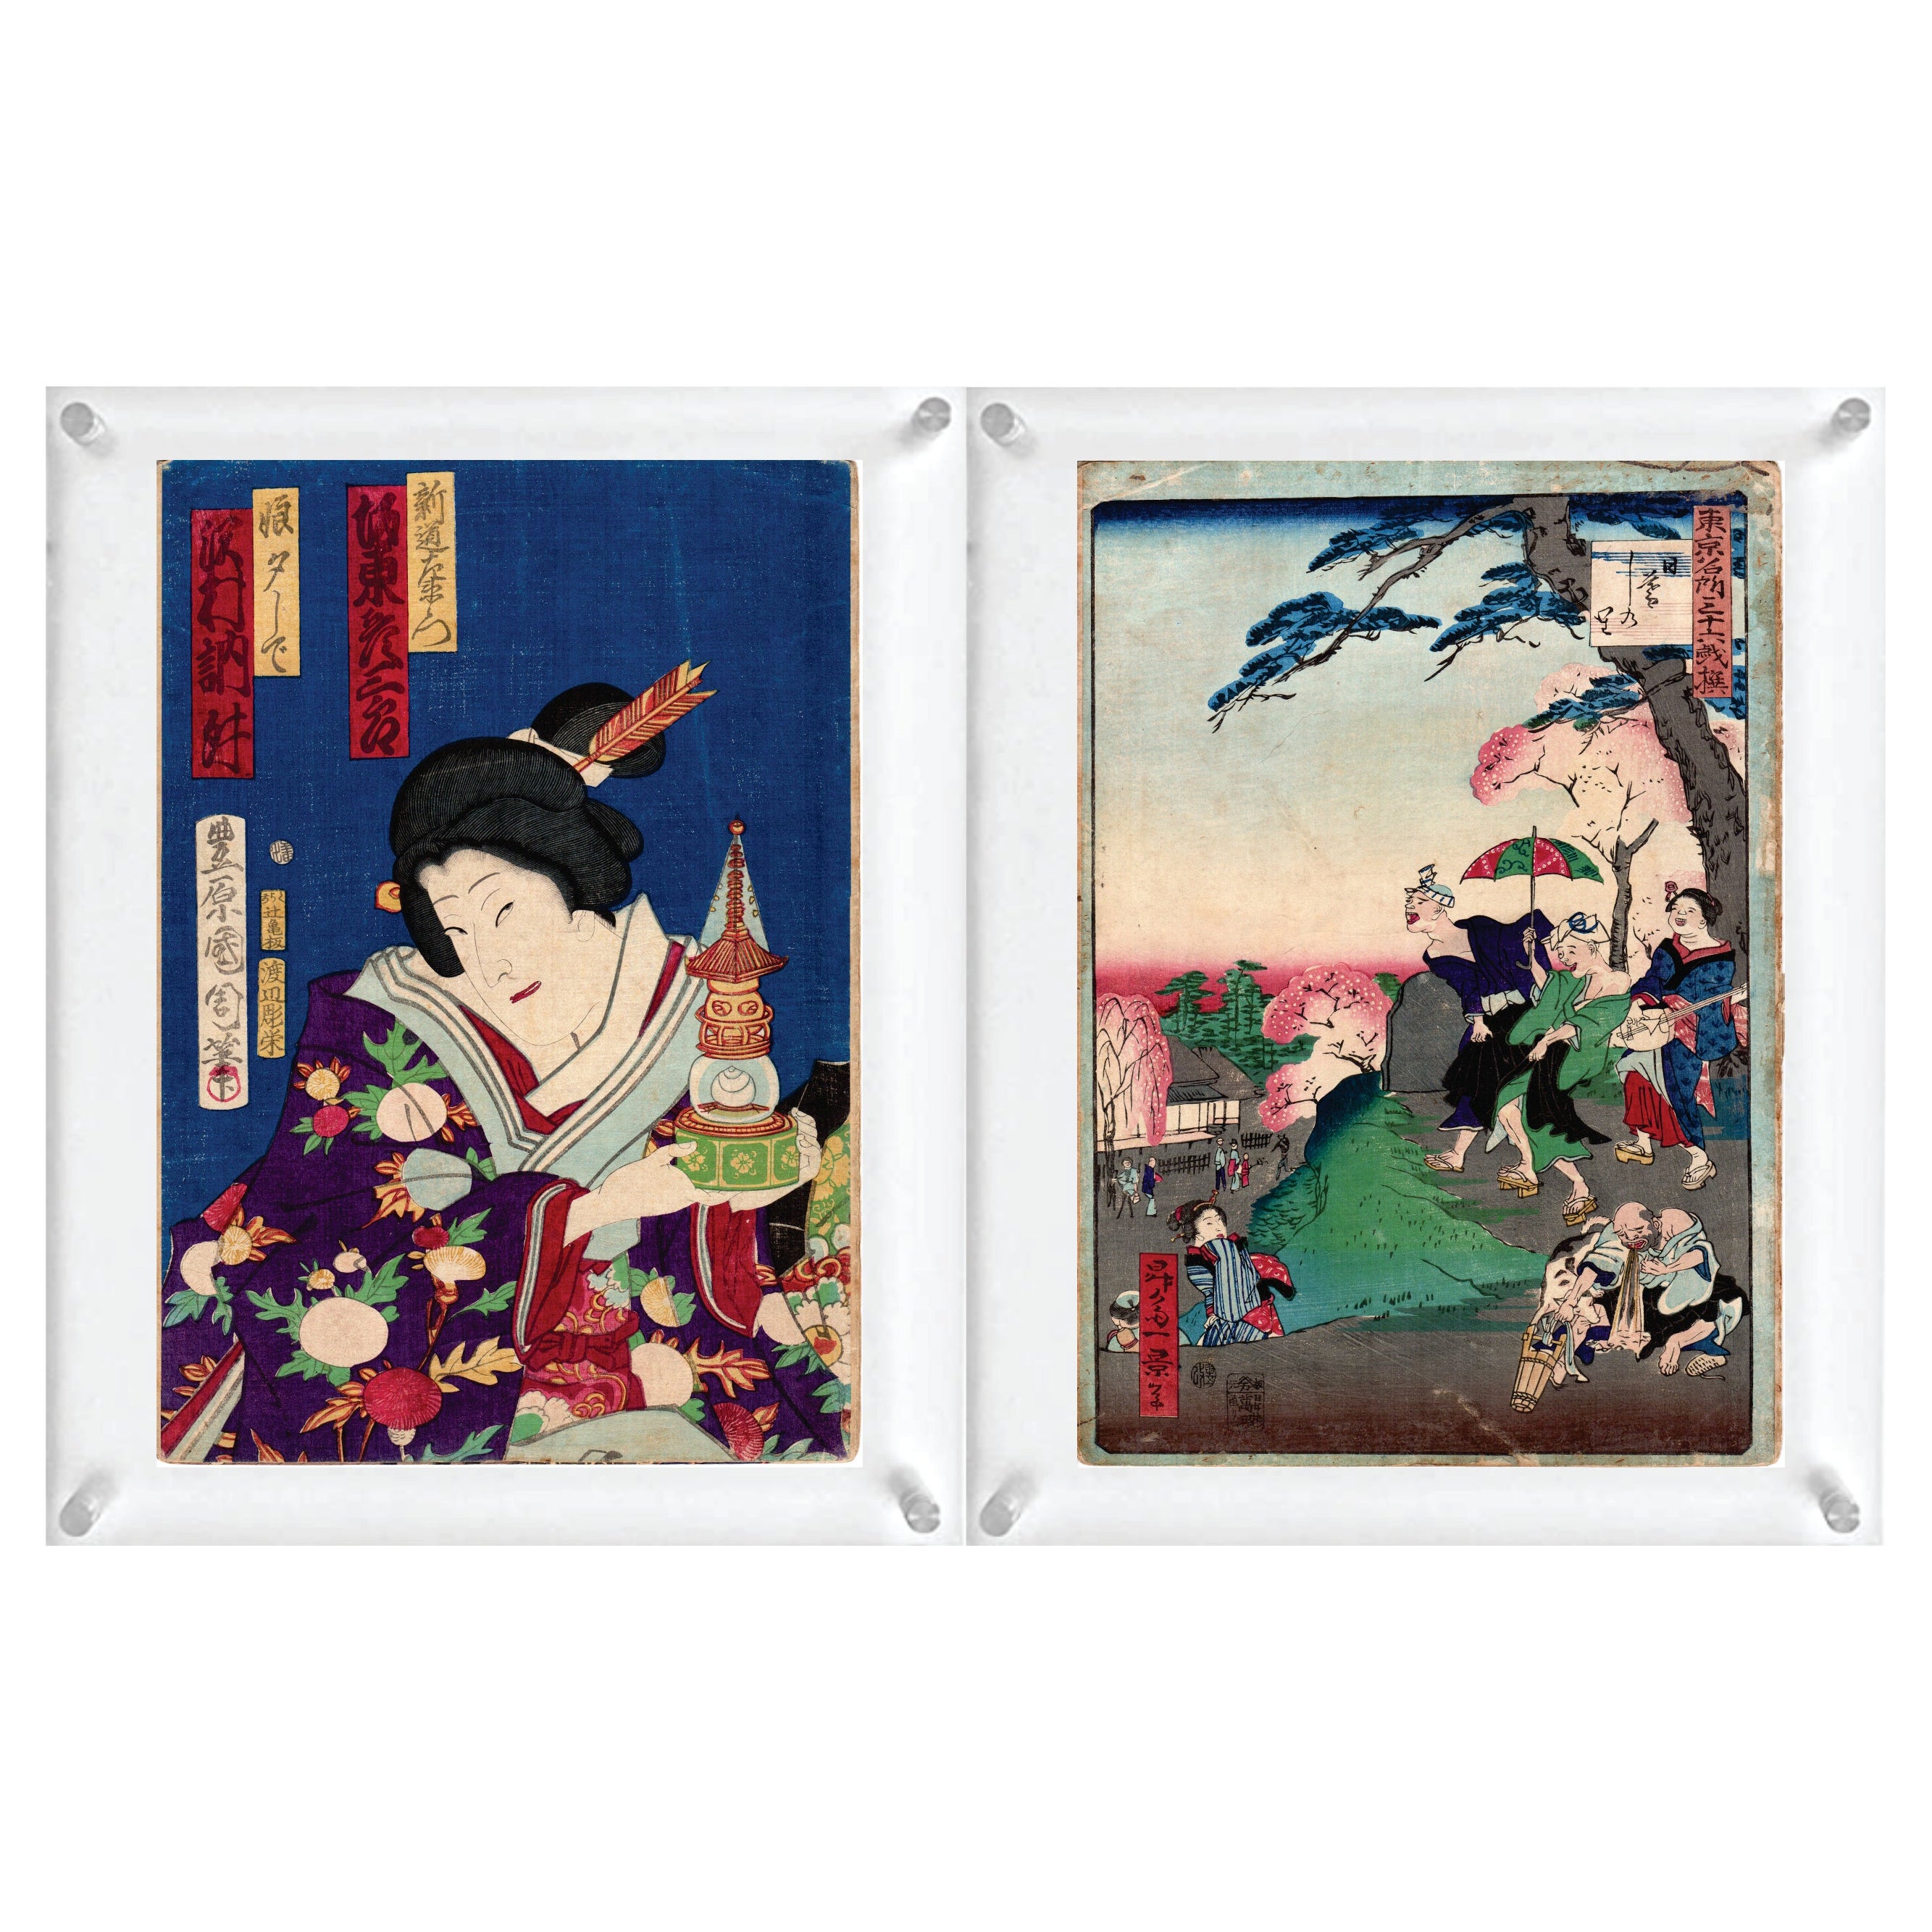 2 Japanese Woodblock Prints 'Double-Side' by Toyohara Kunichika and Shosai Ikkei For Sale